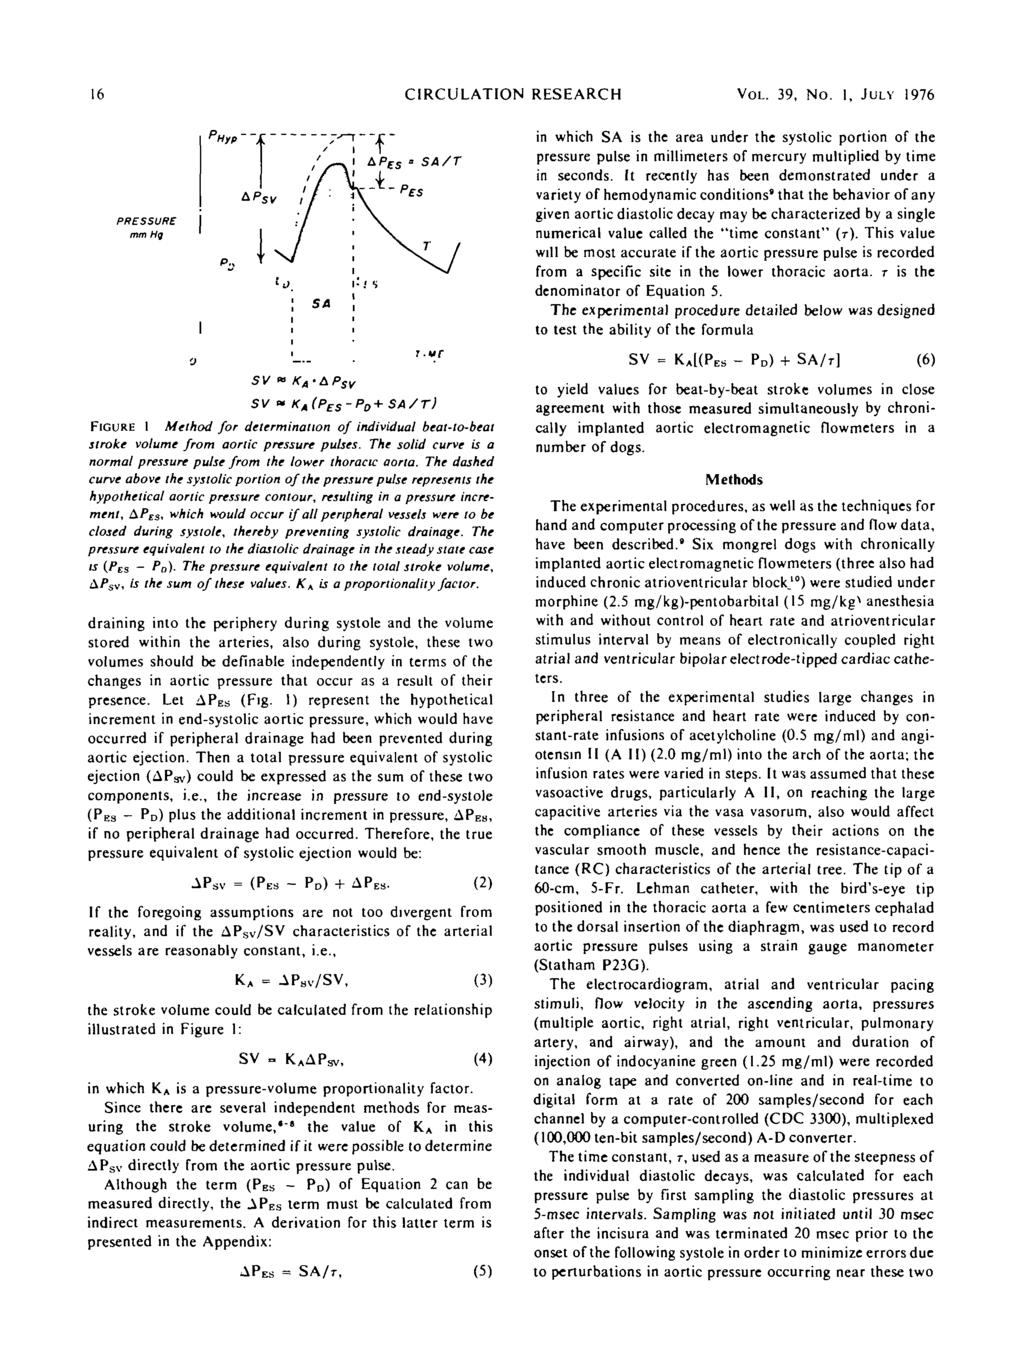 16 CIRCULATION RESEARCH VOL. 39, No. 1, JULY 1976 PRESSURE n whch SA s the area under the systolc porton of the pressure pulse n mllmeters of mercury multpled by tme n seconds.